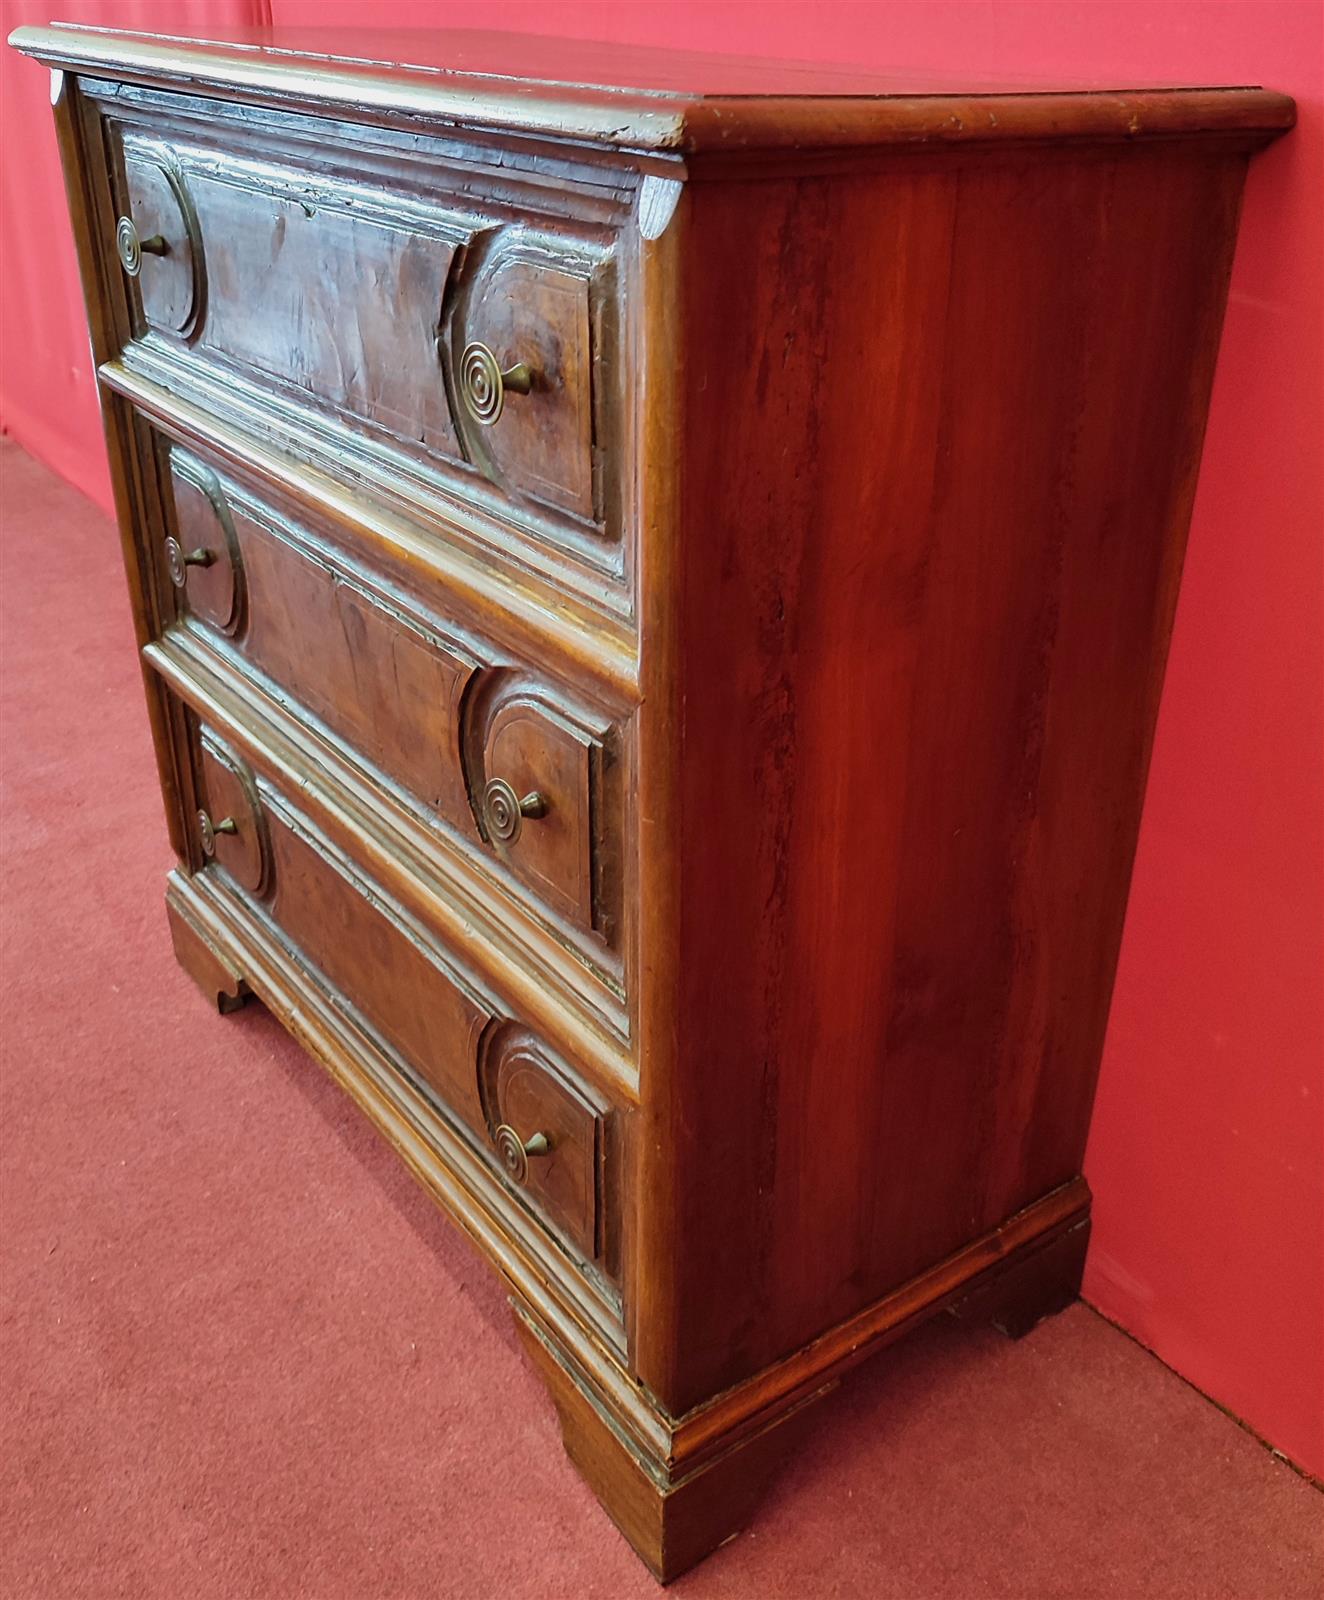 Small chest of drawers in walnut